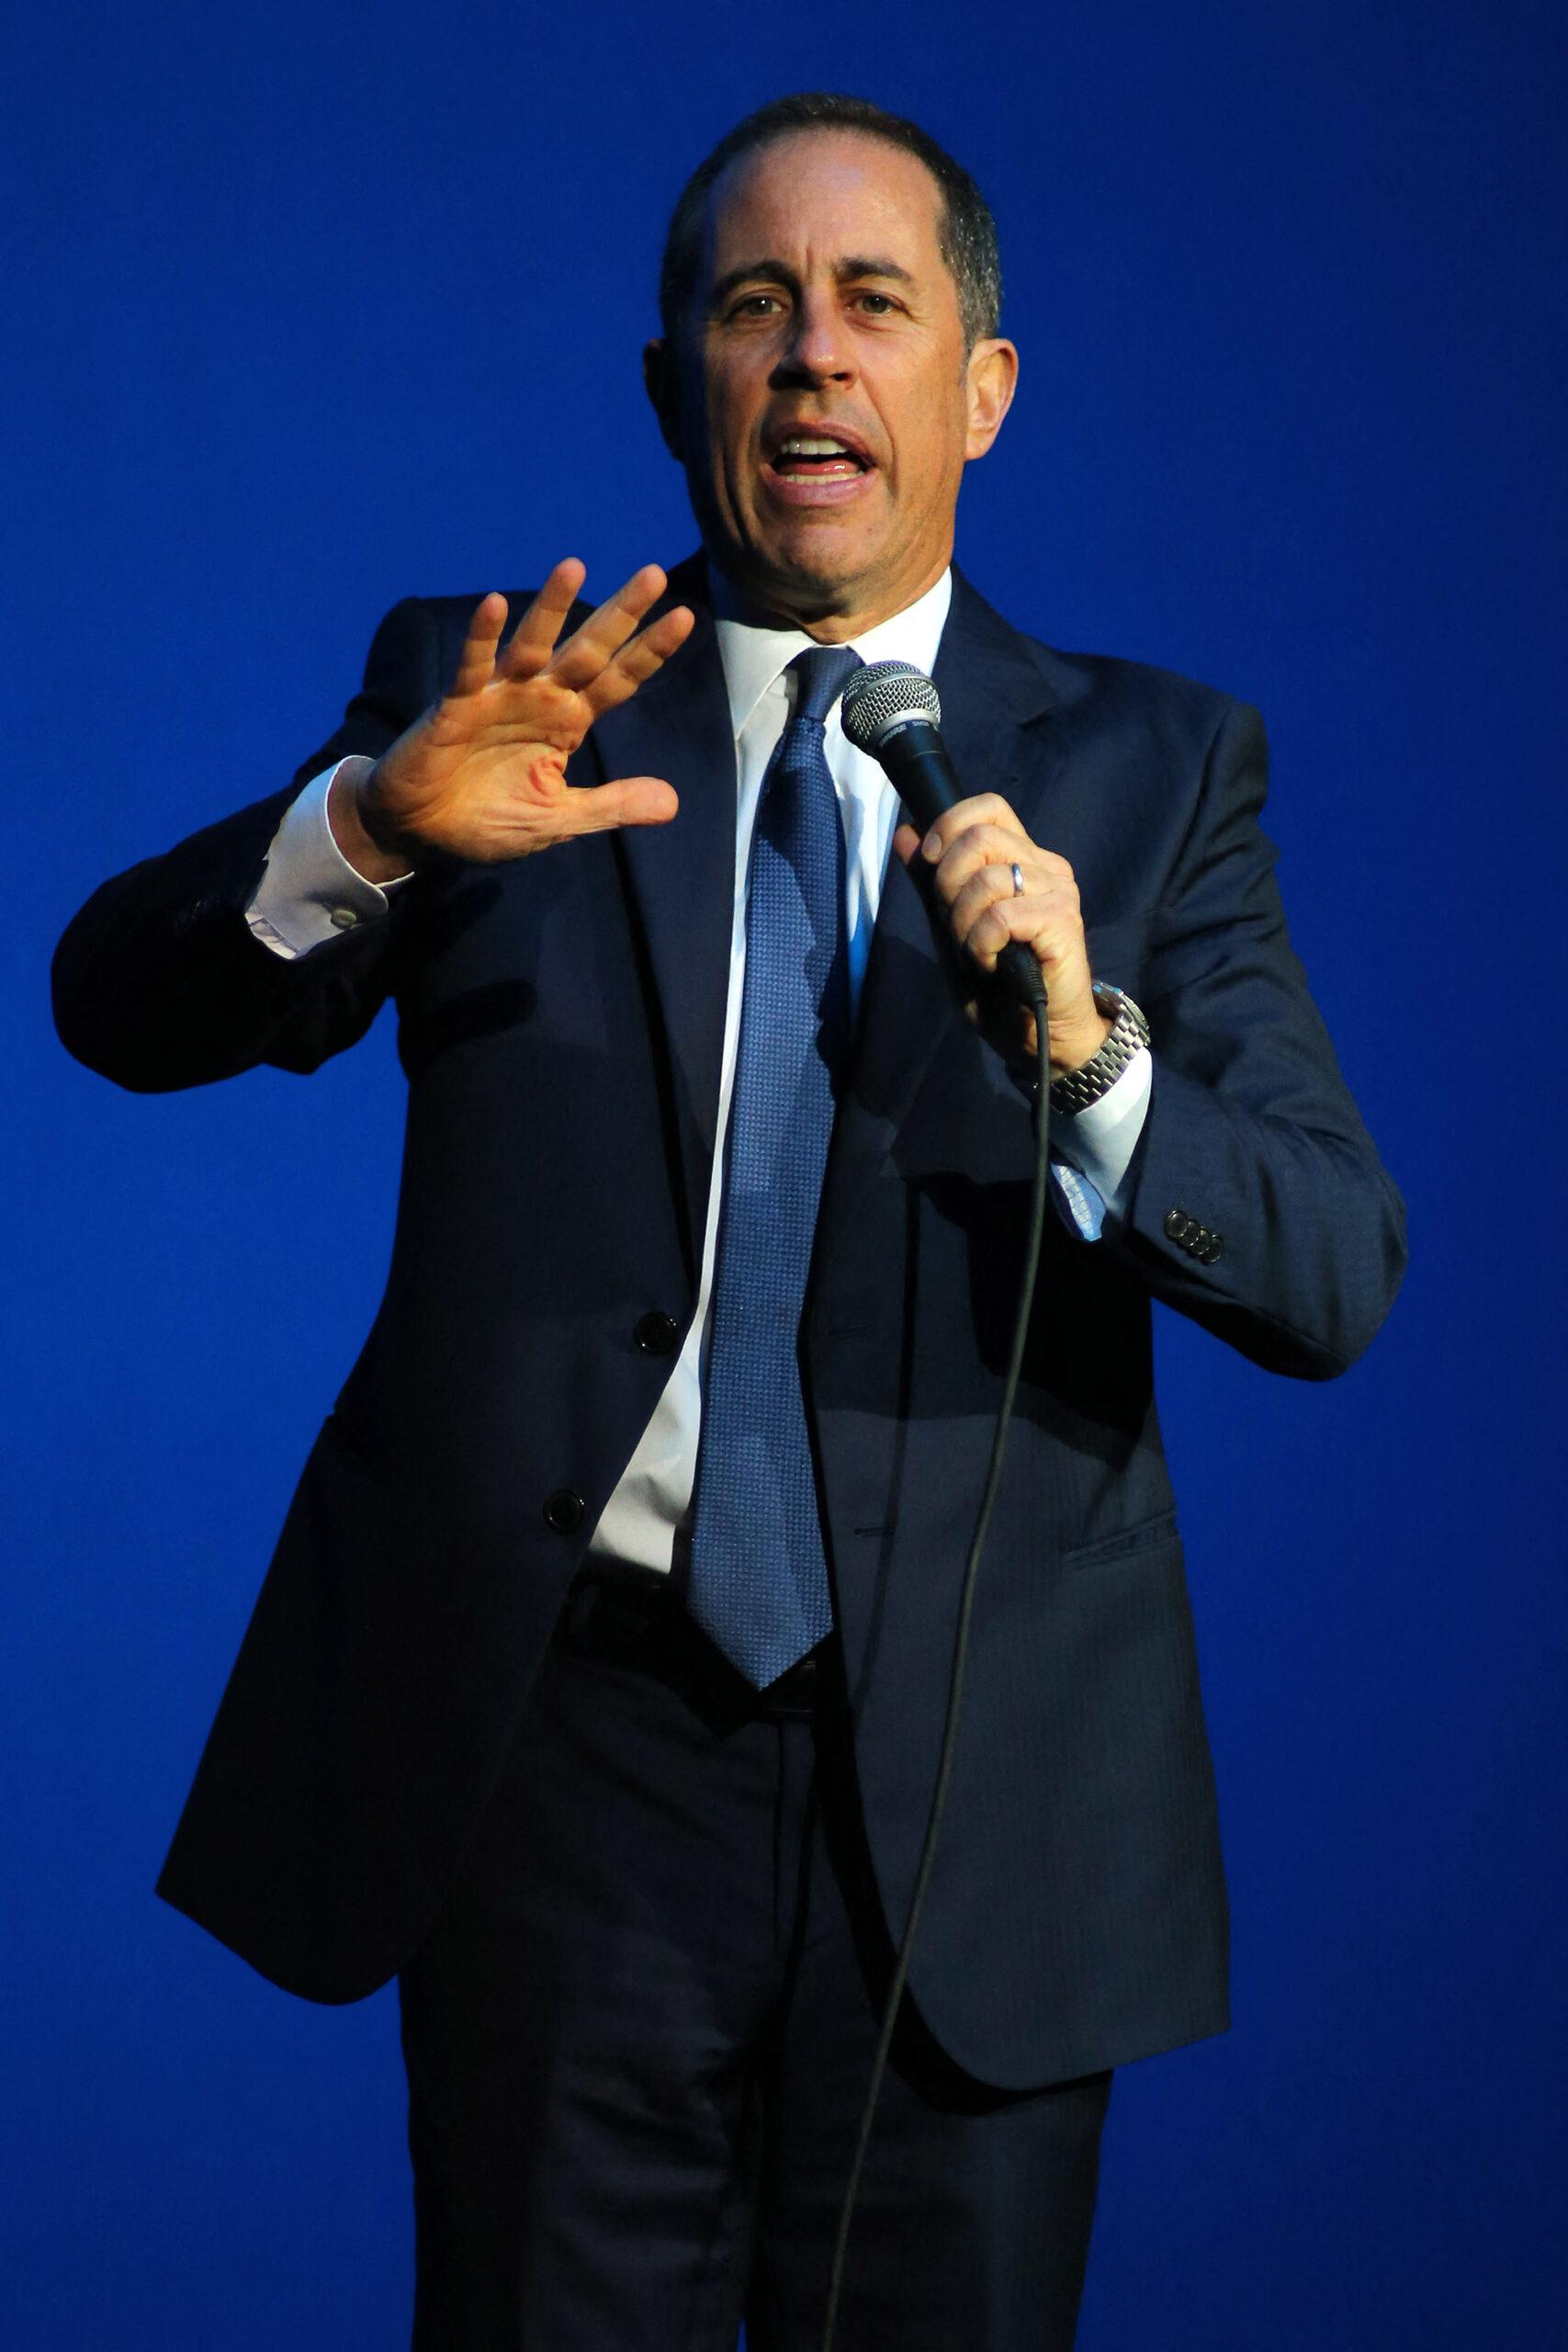 Jerry Seinfeld performs at Hard Rock Live at the Seminole Hard Rock Hotel and Casino in Hollywood, Florida.